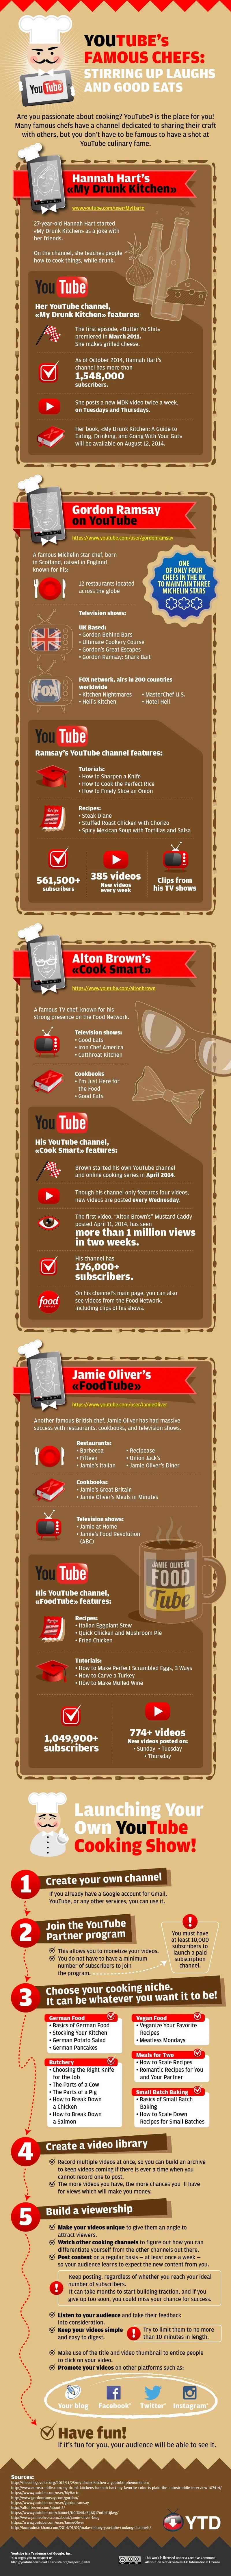 How To Start Your Own Cooking Channel on YouTube - #Infographic